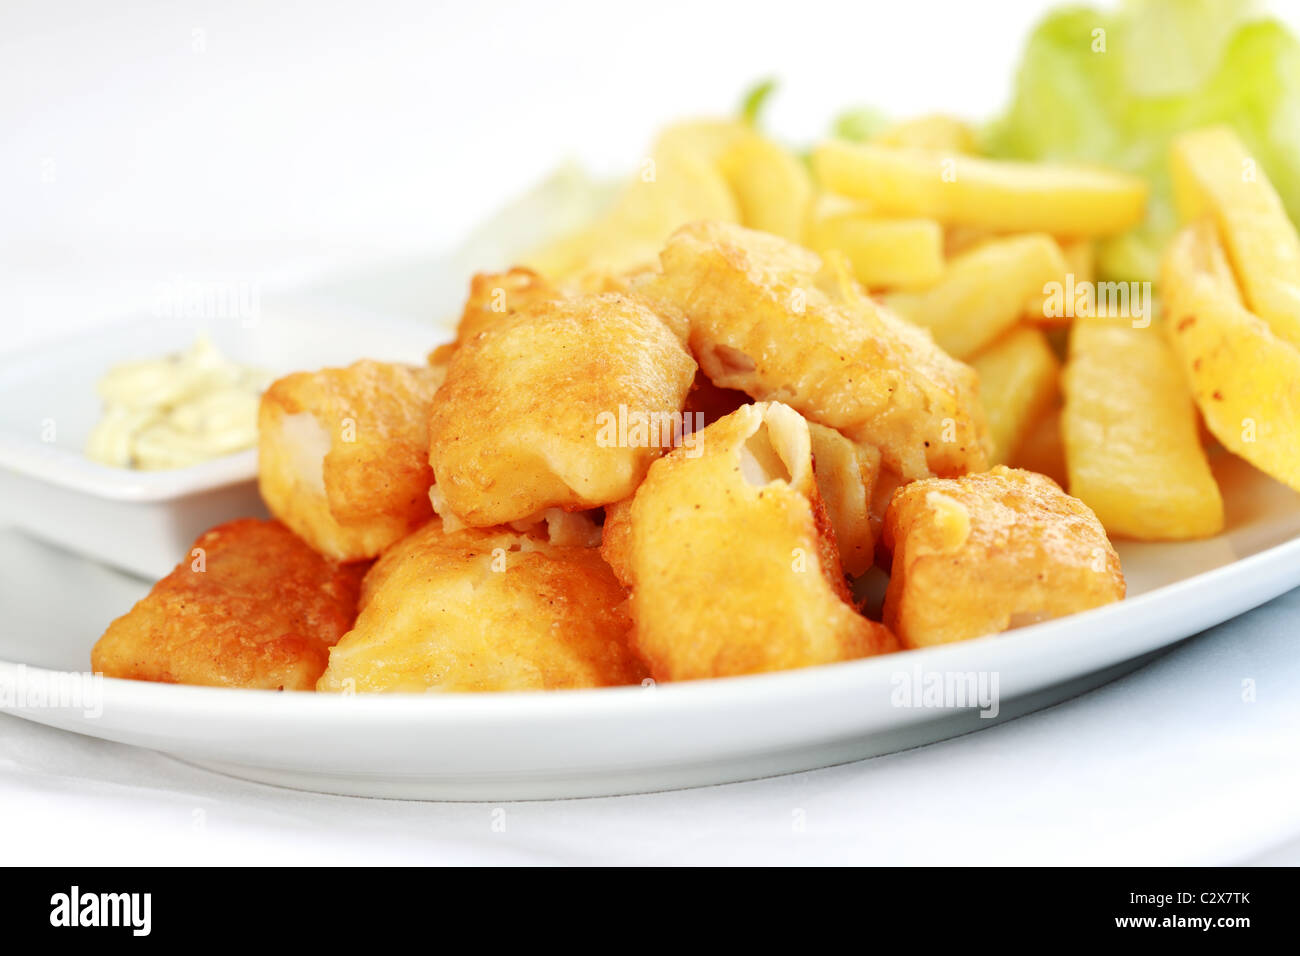 Fried fish and chips with Stock Photo